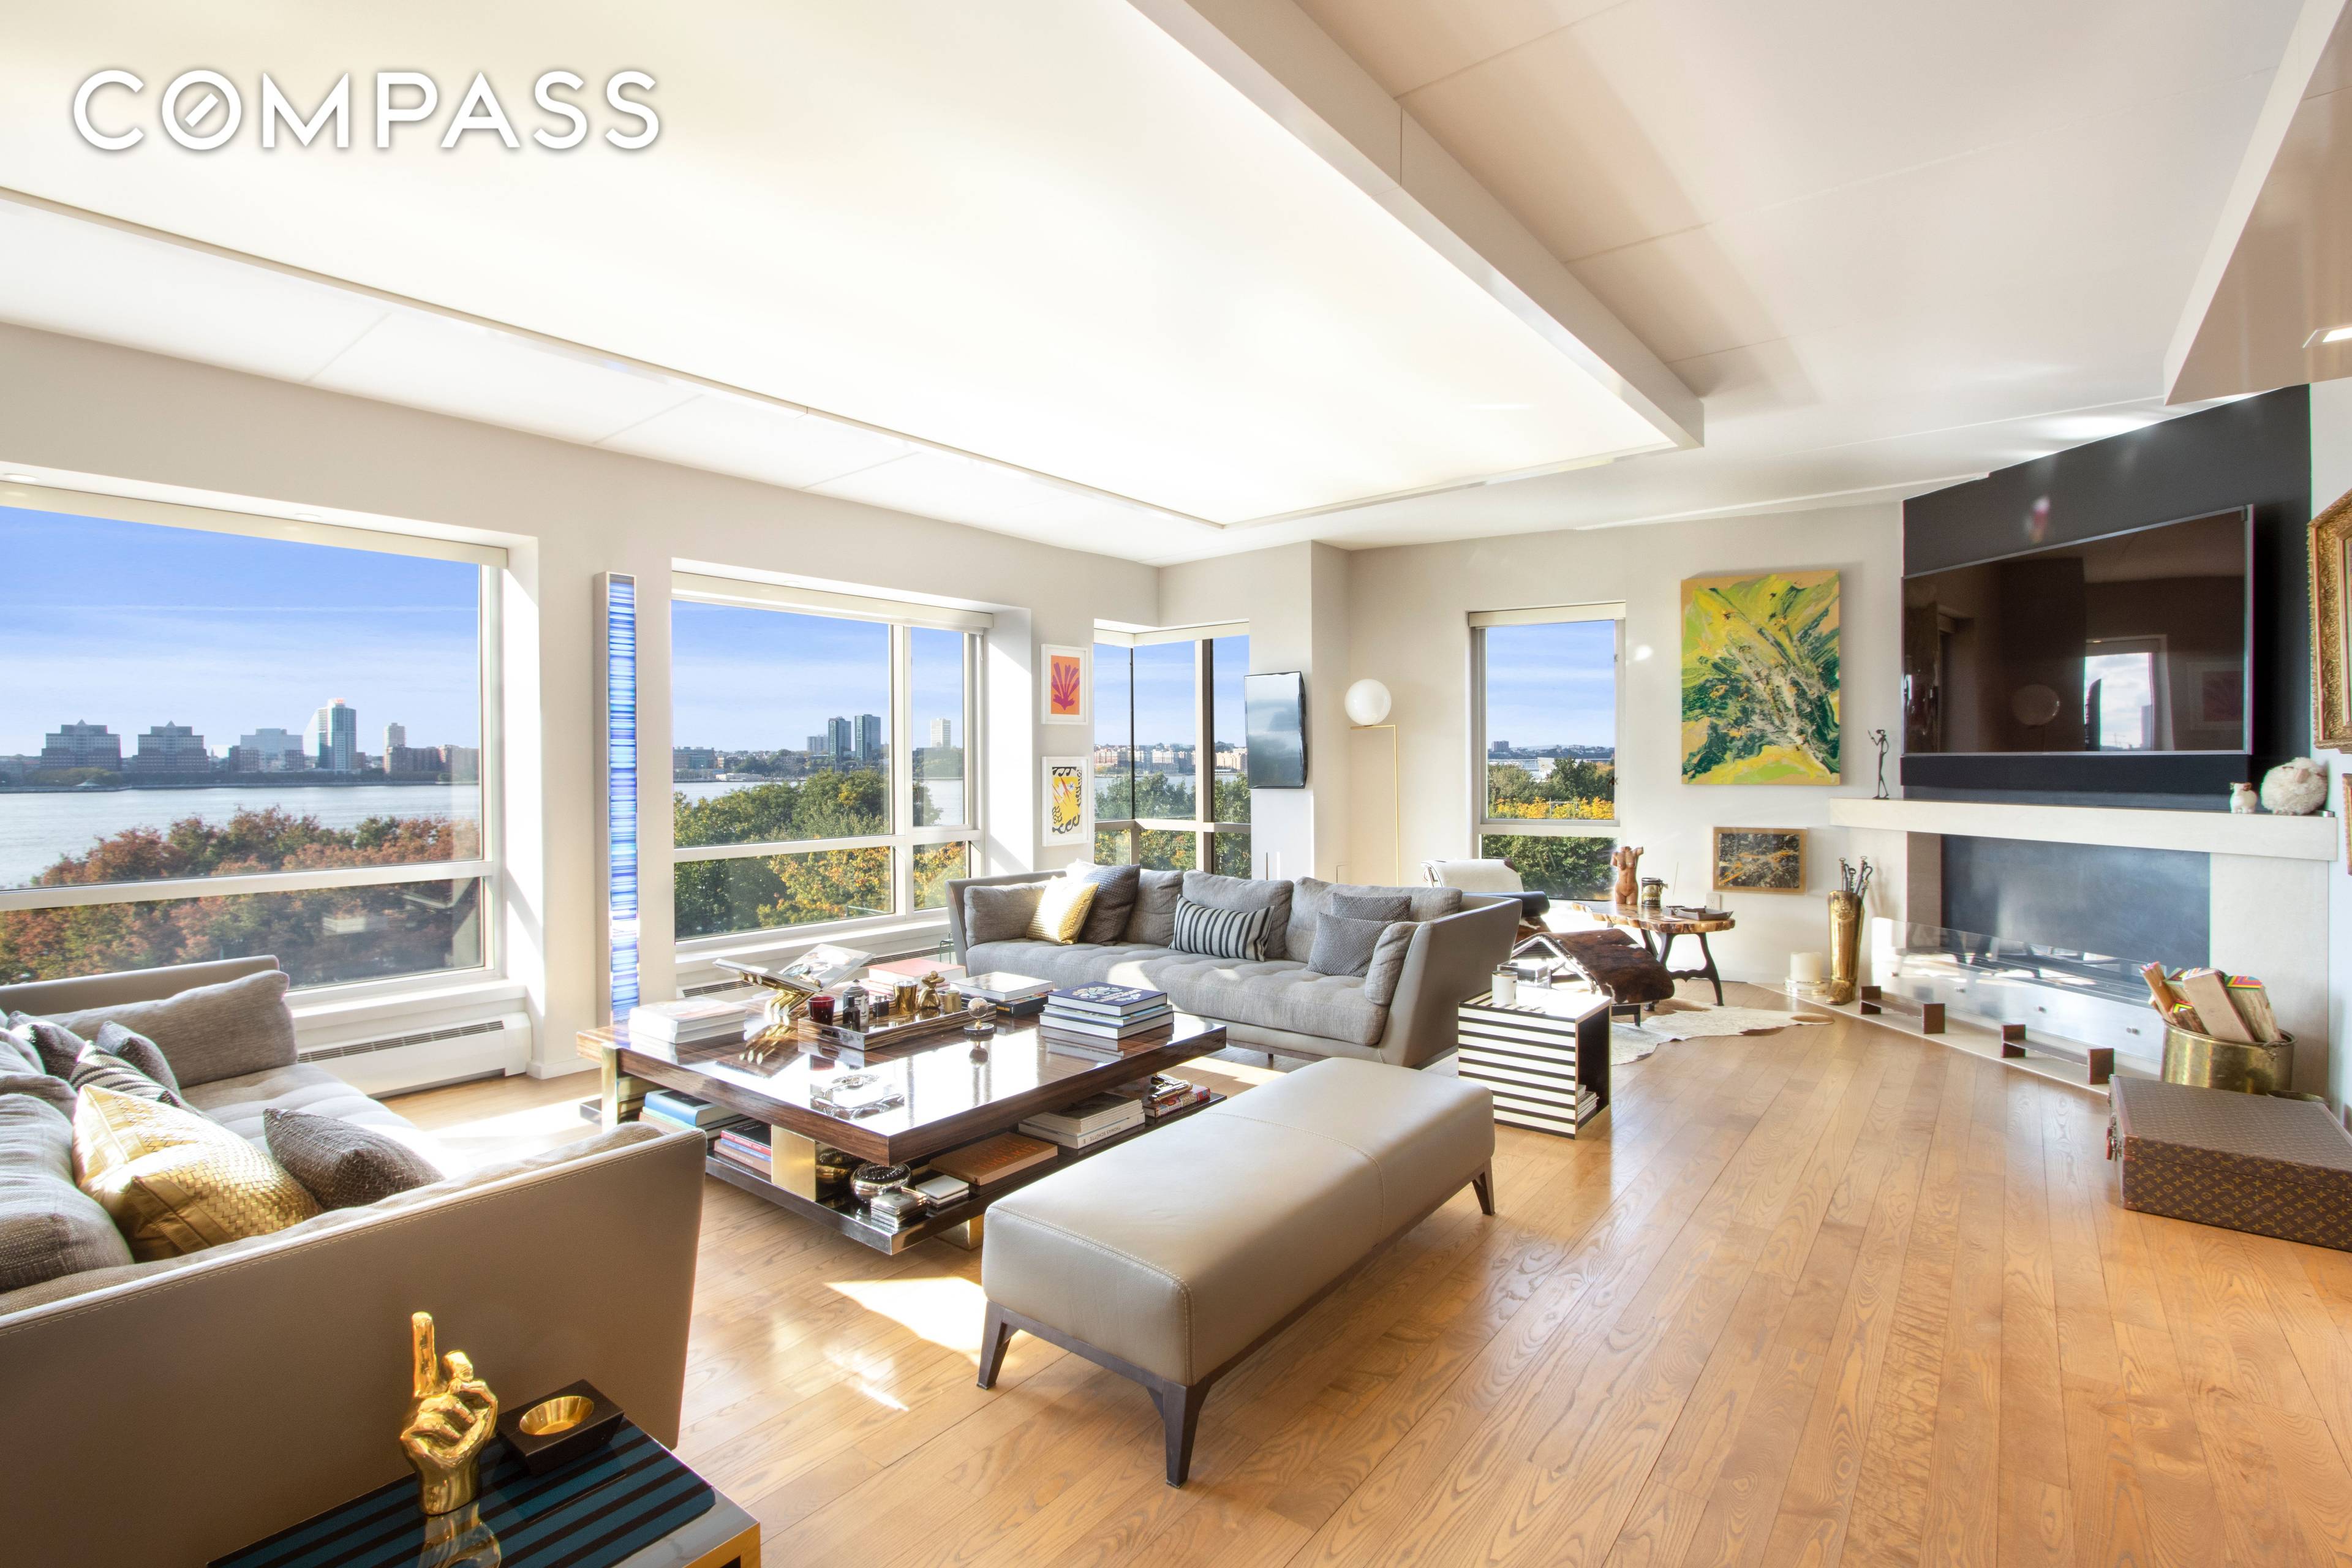 Welcome to 374 West 11th Street, Unit 5 a luxuriously designed home with spectacular views overlooking the Hudson River a true masterpiece within the West Village.